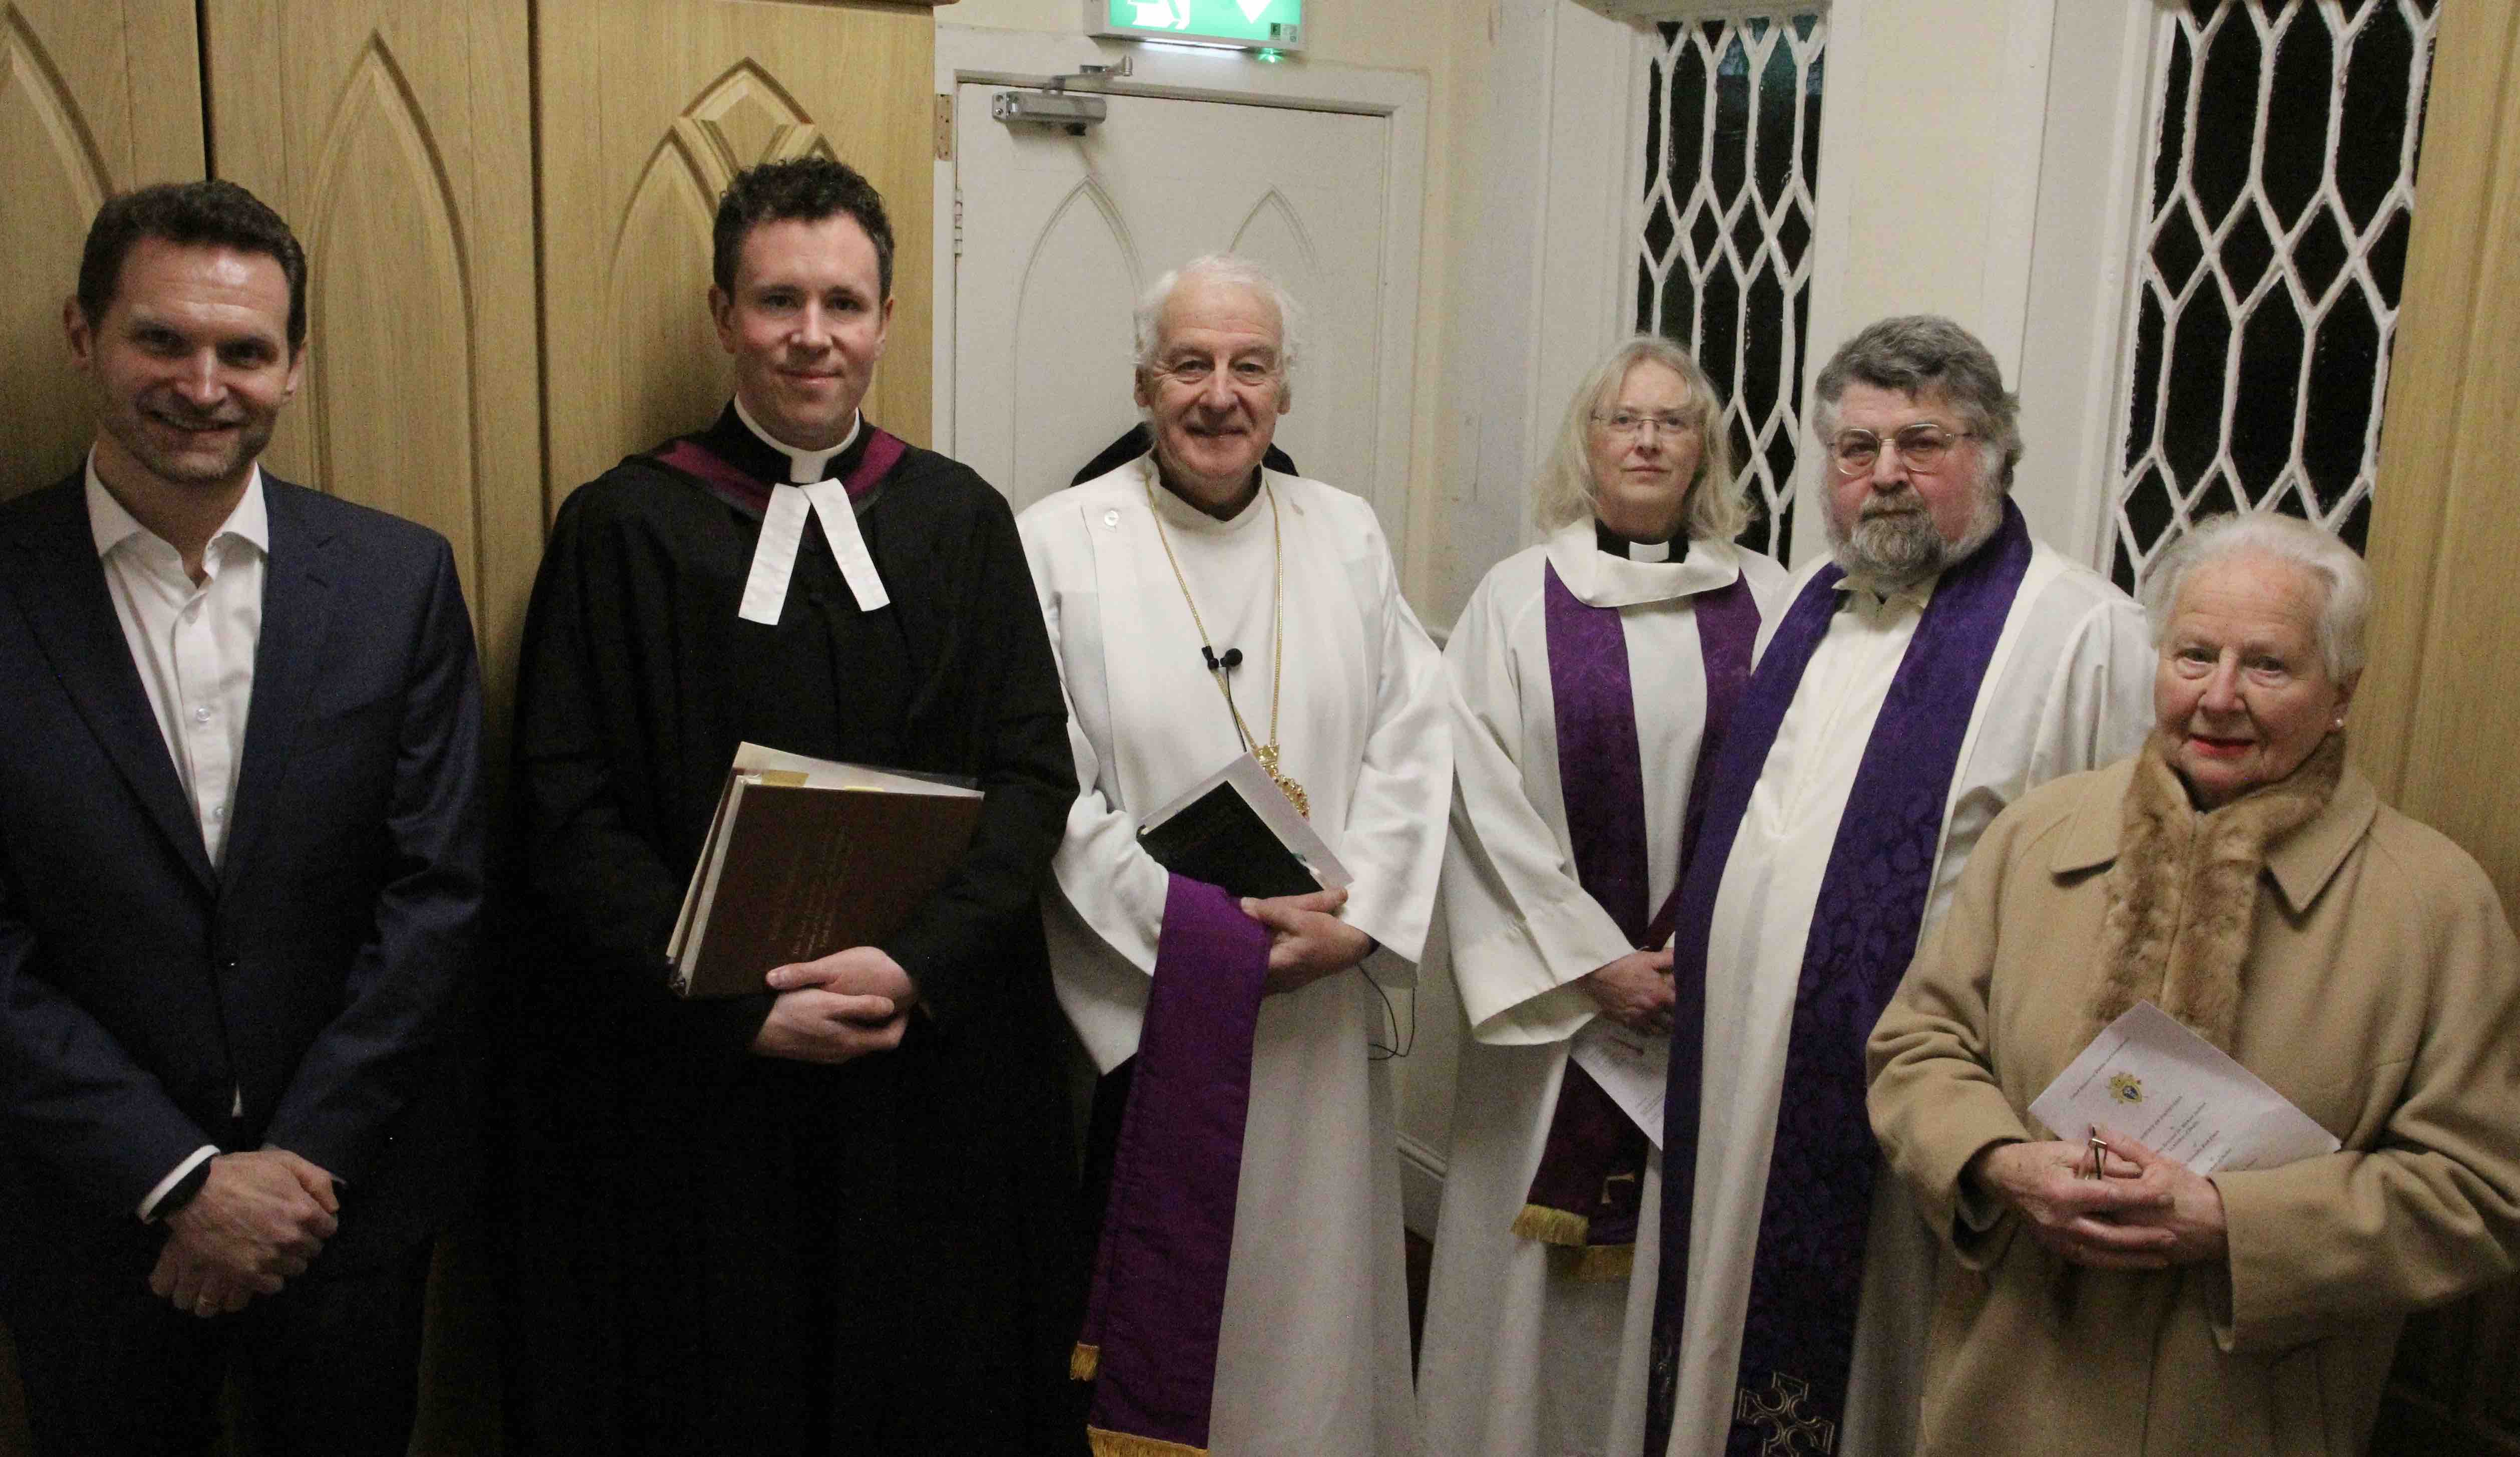 The new Rector, the Revd Ruth Elmes with the Church Wardens, Archbishop, Archdeacon of Glendalough and the Registrar.